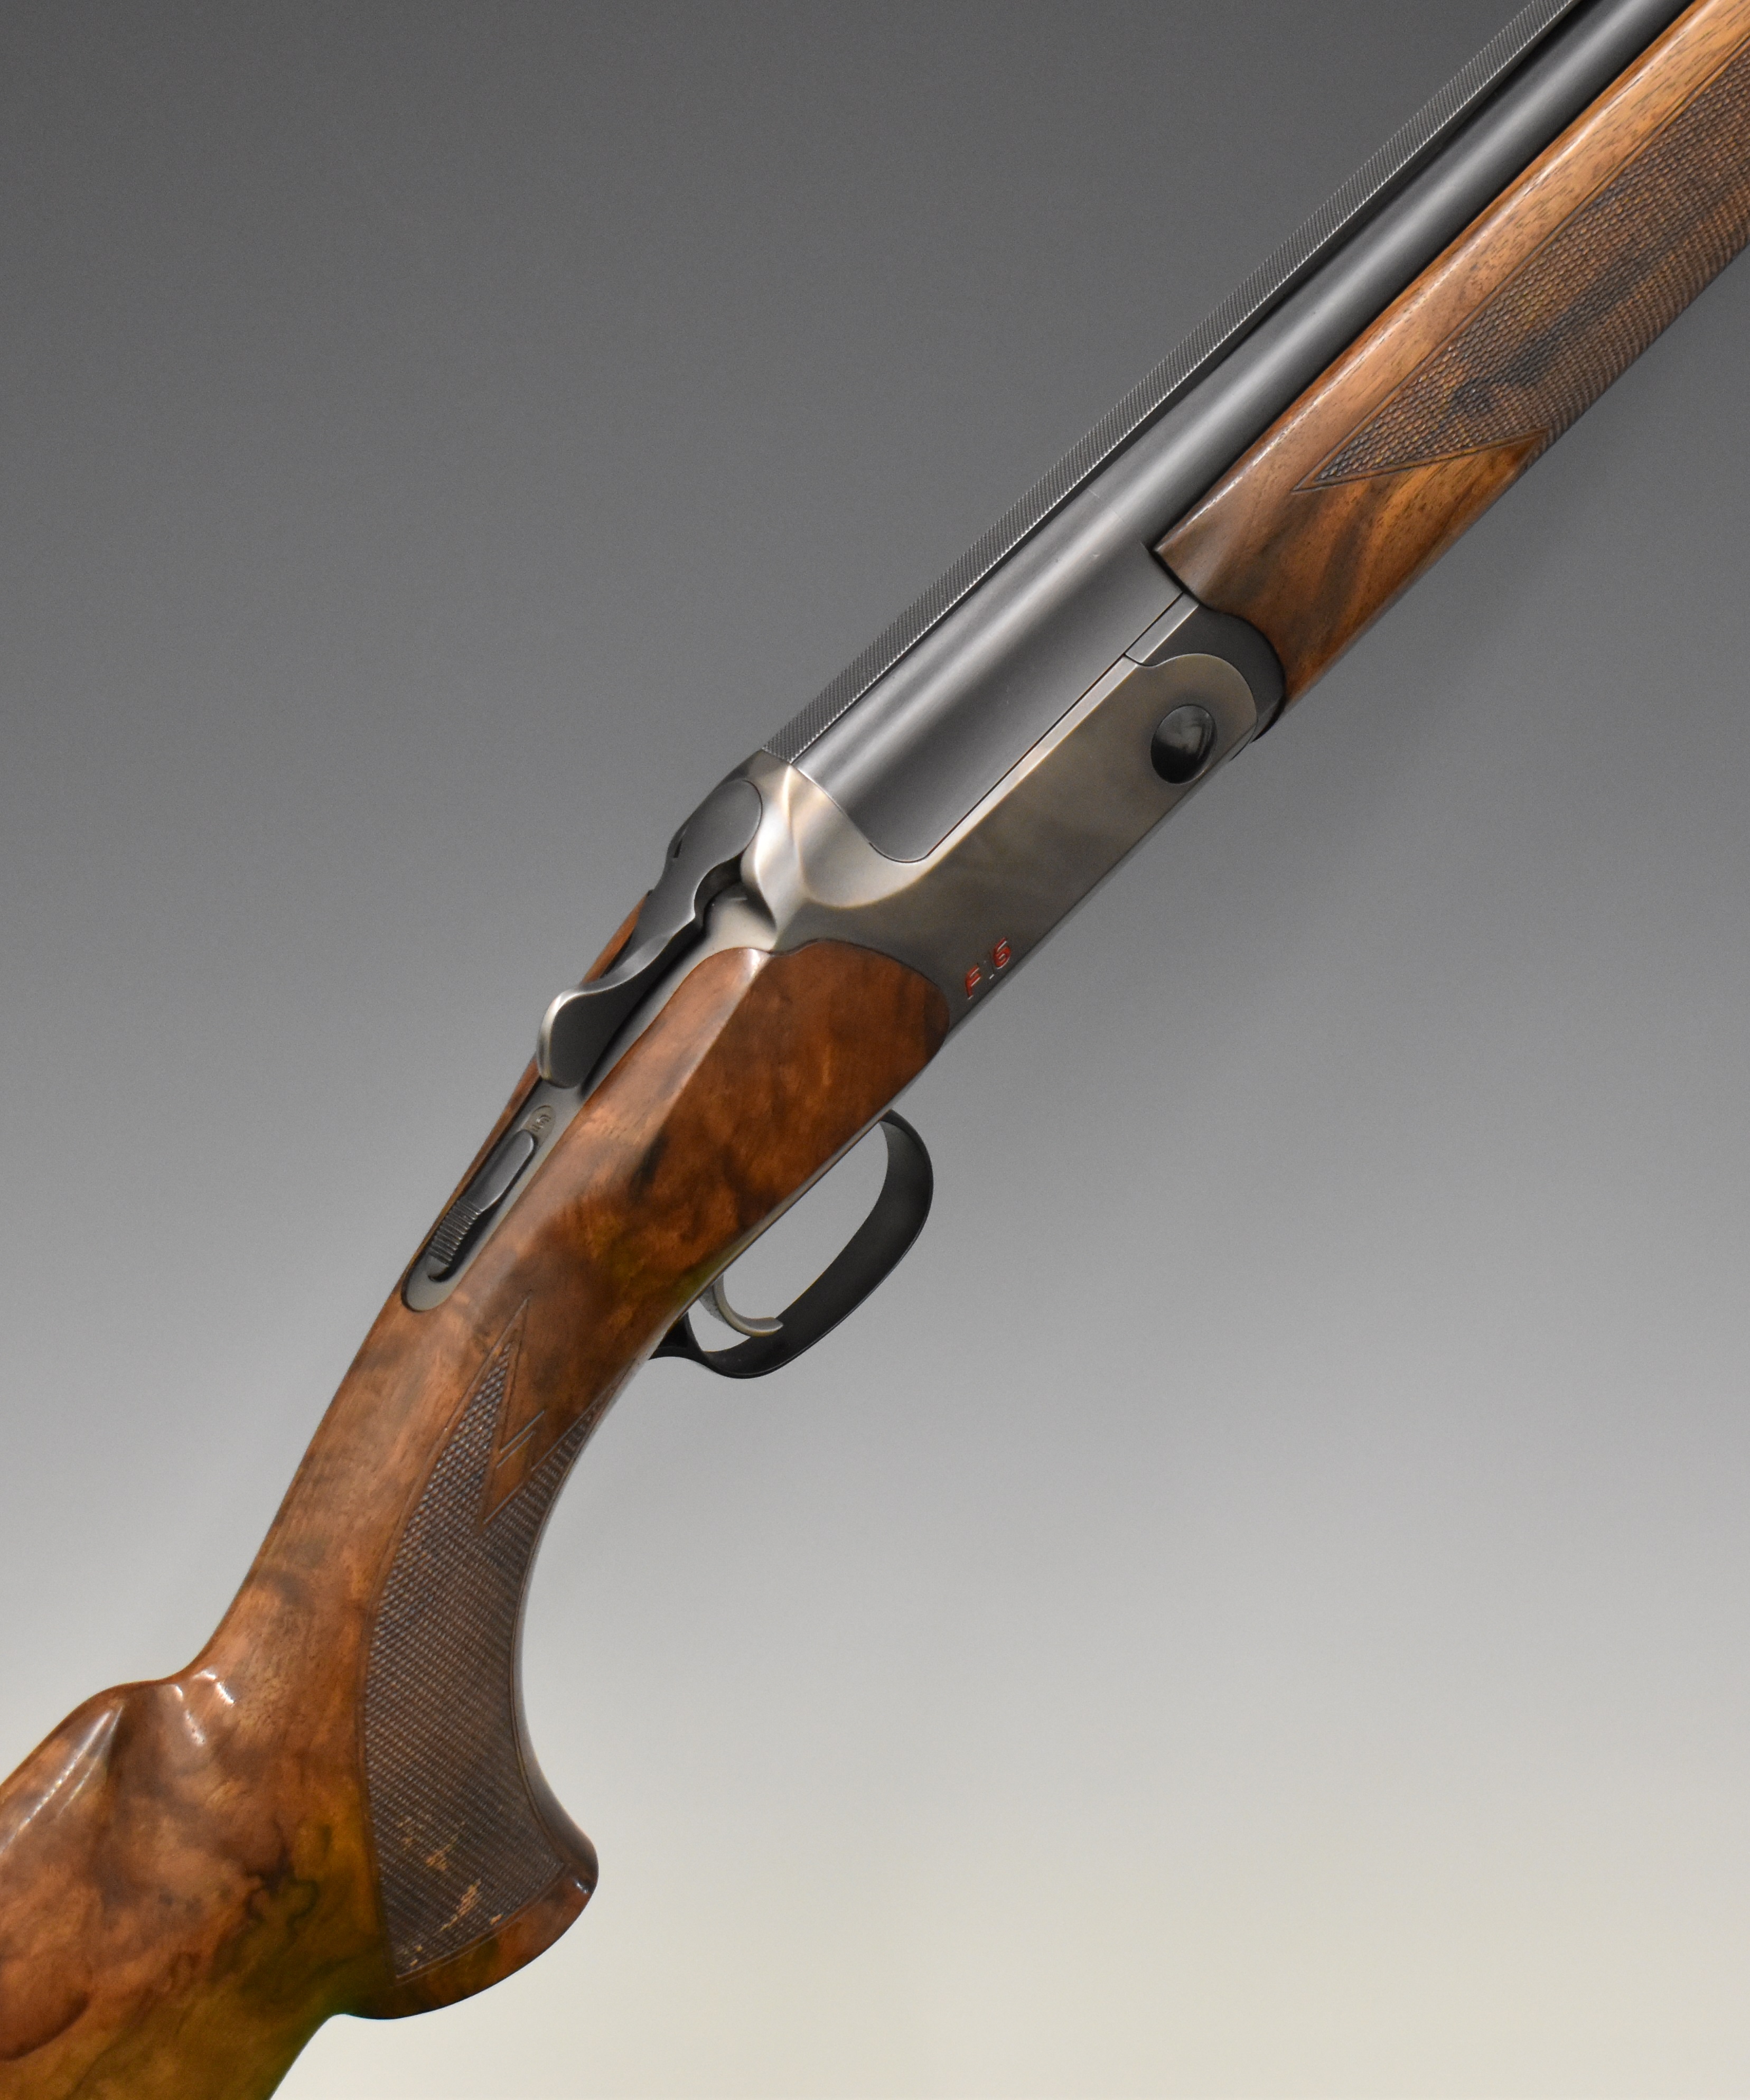 Blaser F16 12 bore over under ejector shotgun with named locks and underside, chequered semi-